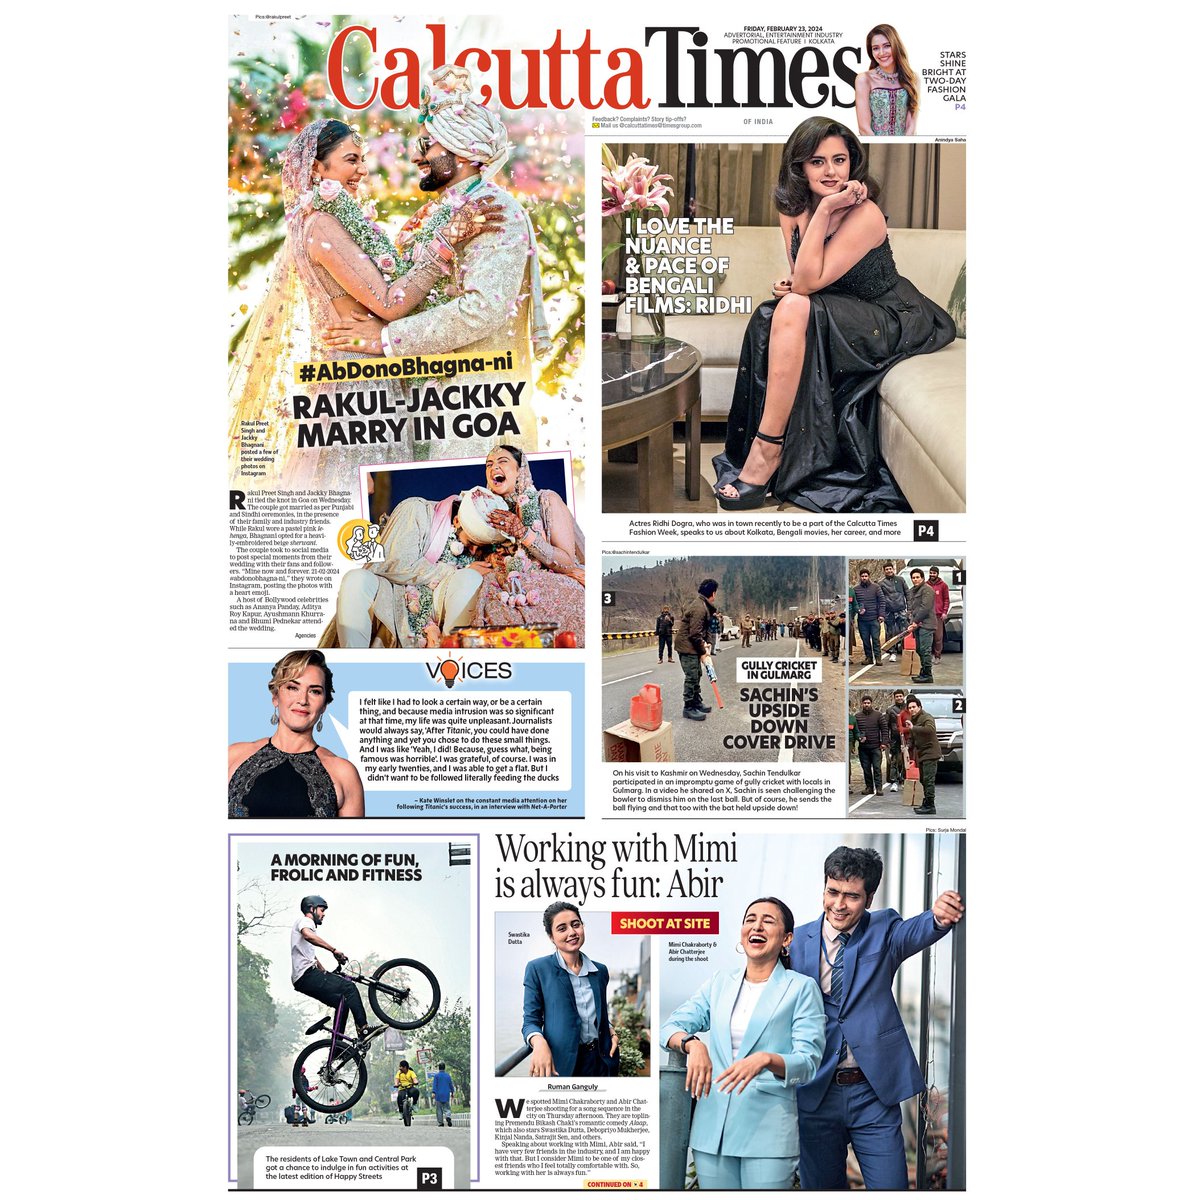 In today's Calcutta Times: Rakul Preet Singh and Jackky Bhagnani tied the knot in Goa, Mimi Chakraborty and Abir Chatterjee to pair up for an upcoming film, an exclusive interview with actress Ridhi Dogra #rakulpreetjackkybhagnani #mimichakraborty #abirchatterjee #ridhidogra